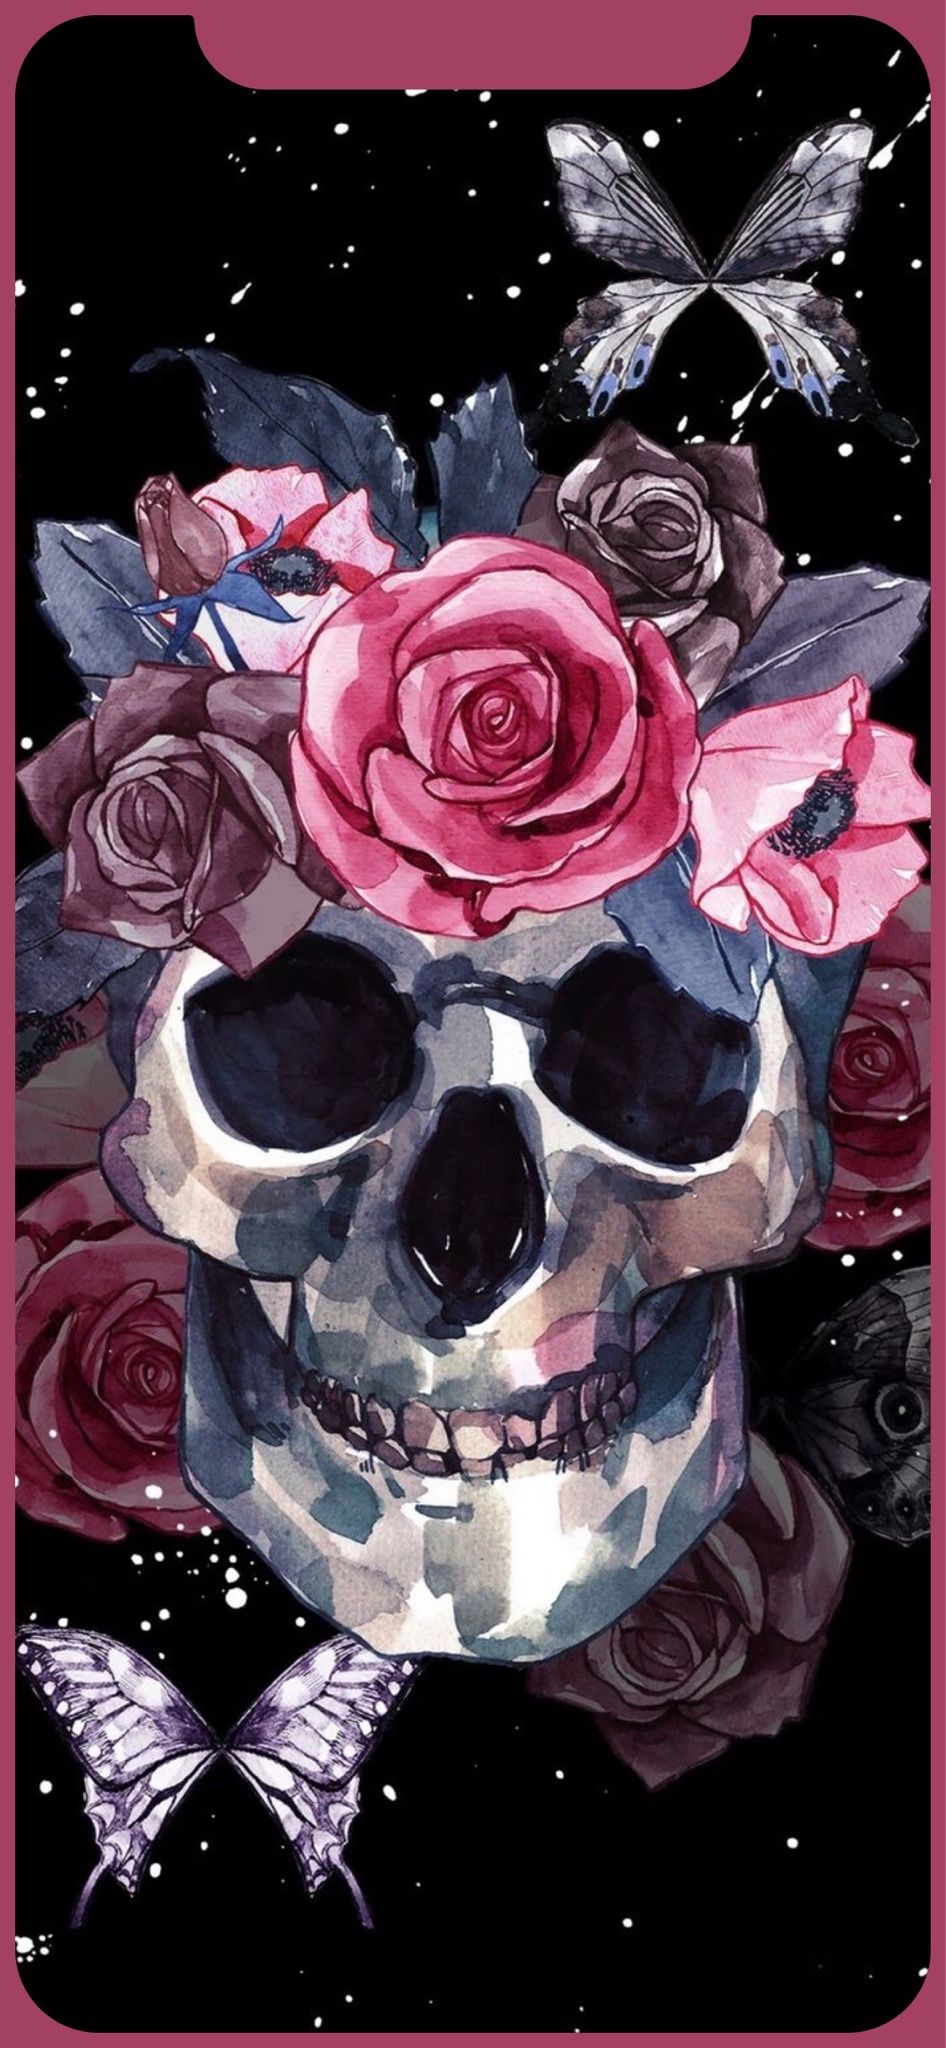 Skulls and Flowers Wallpaper Free Skulls and Flowers Background